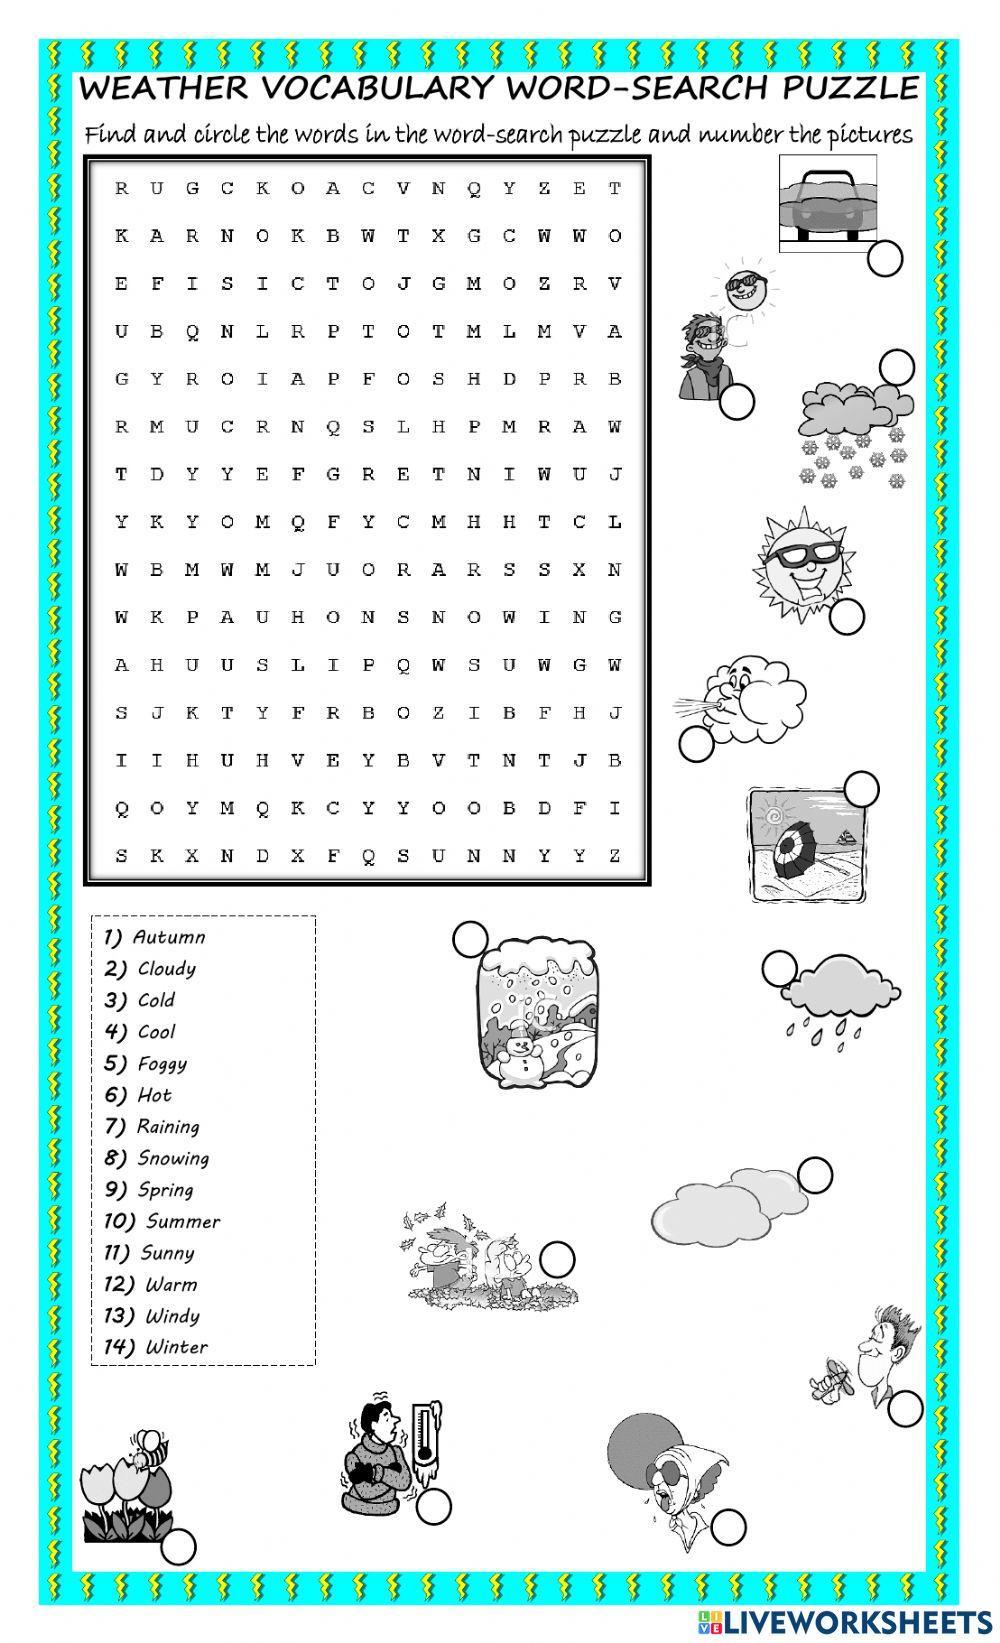 Weather wordsearch